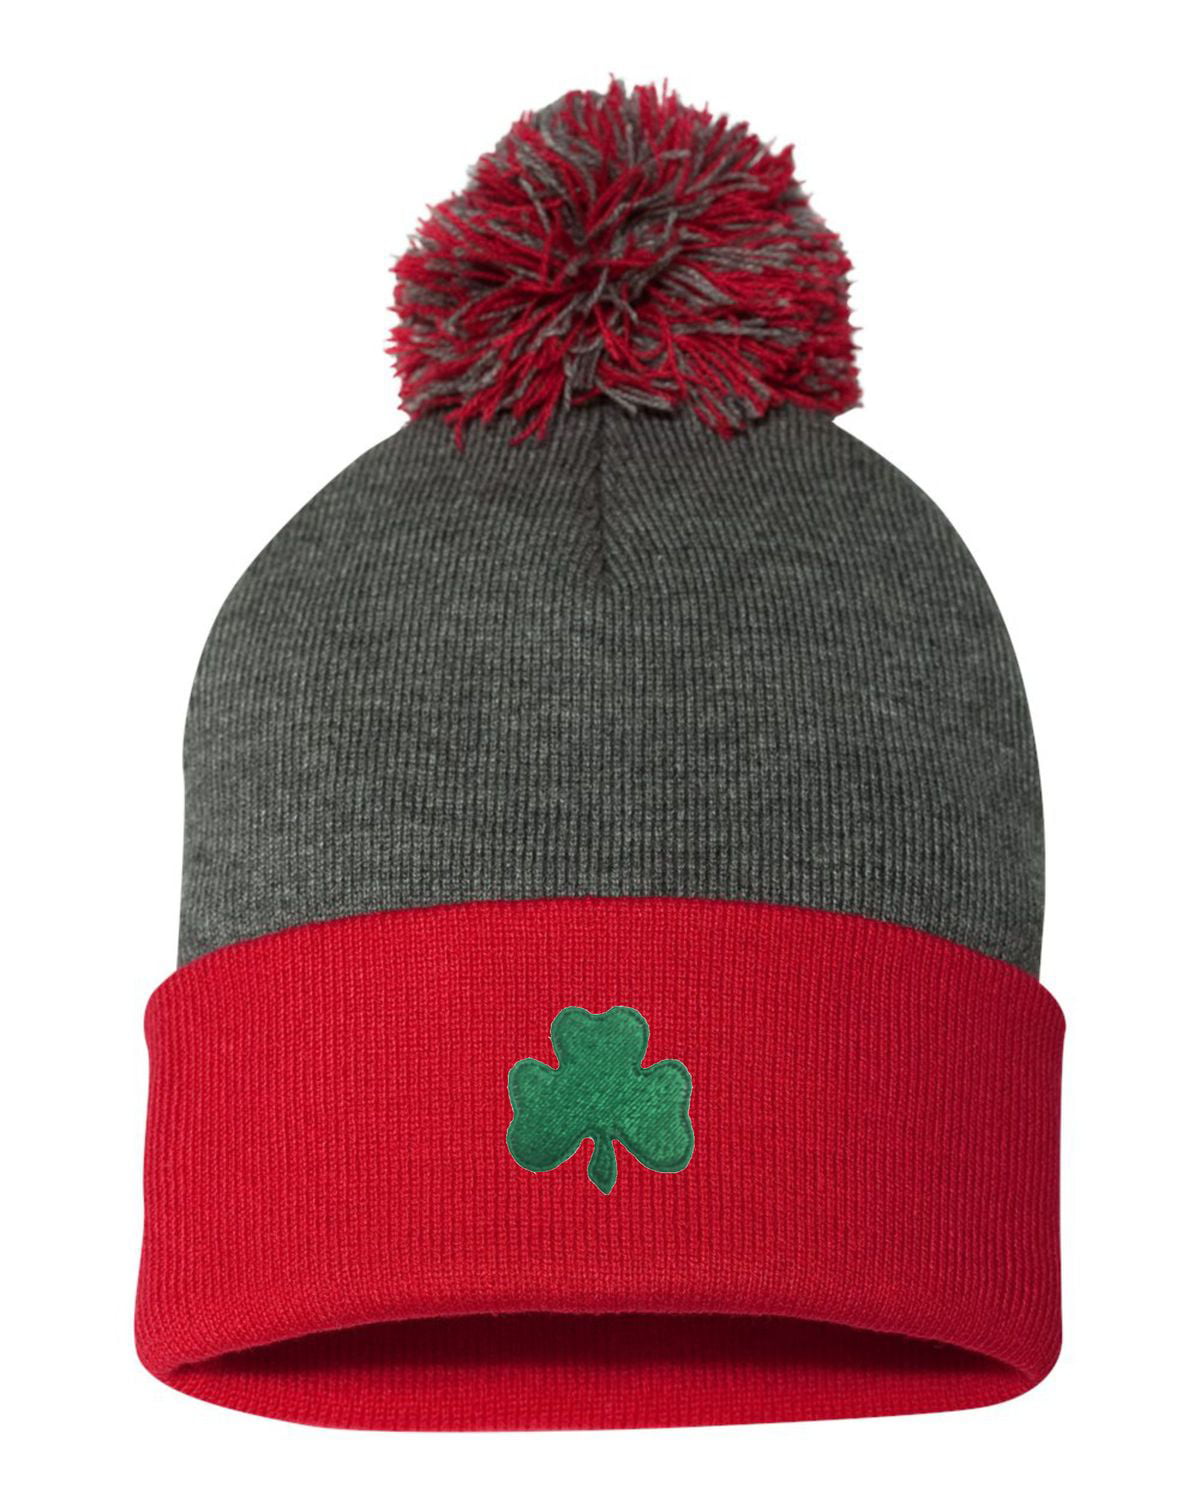 Go All Out Adult Shamrock St Patricks Day Embroidered Knit Beanie Pom Cap